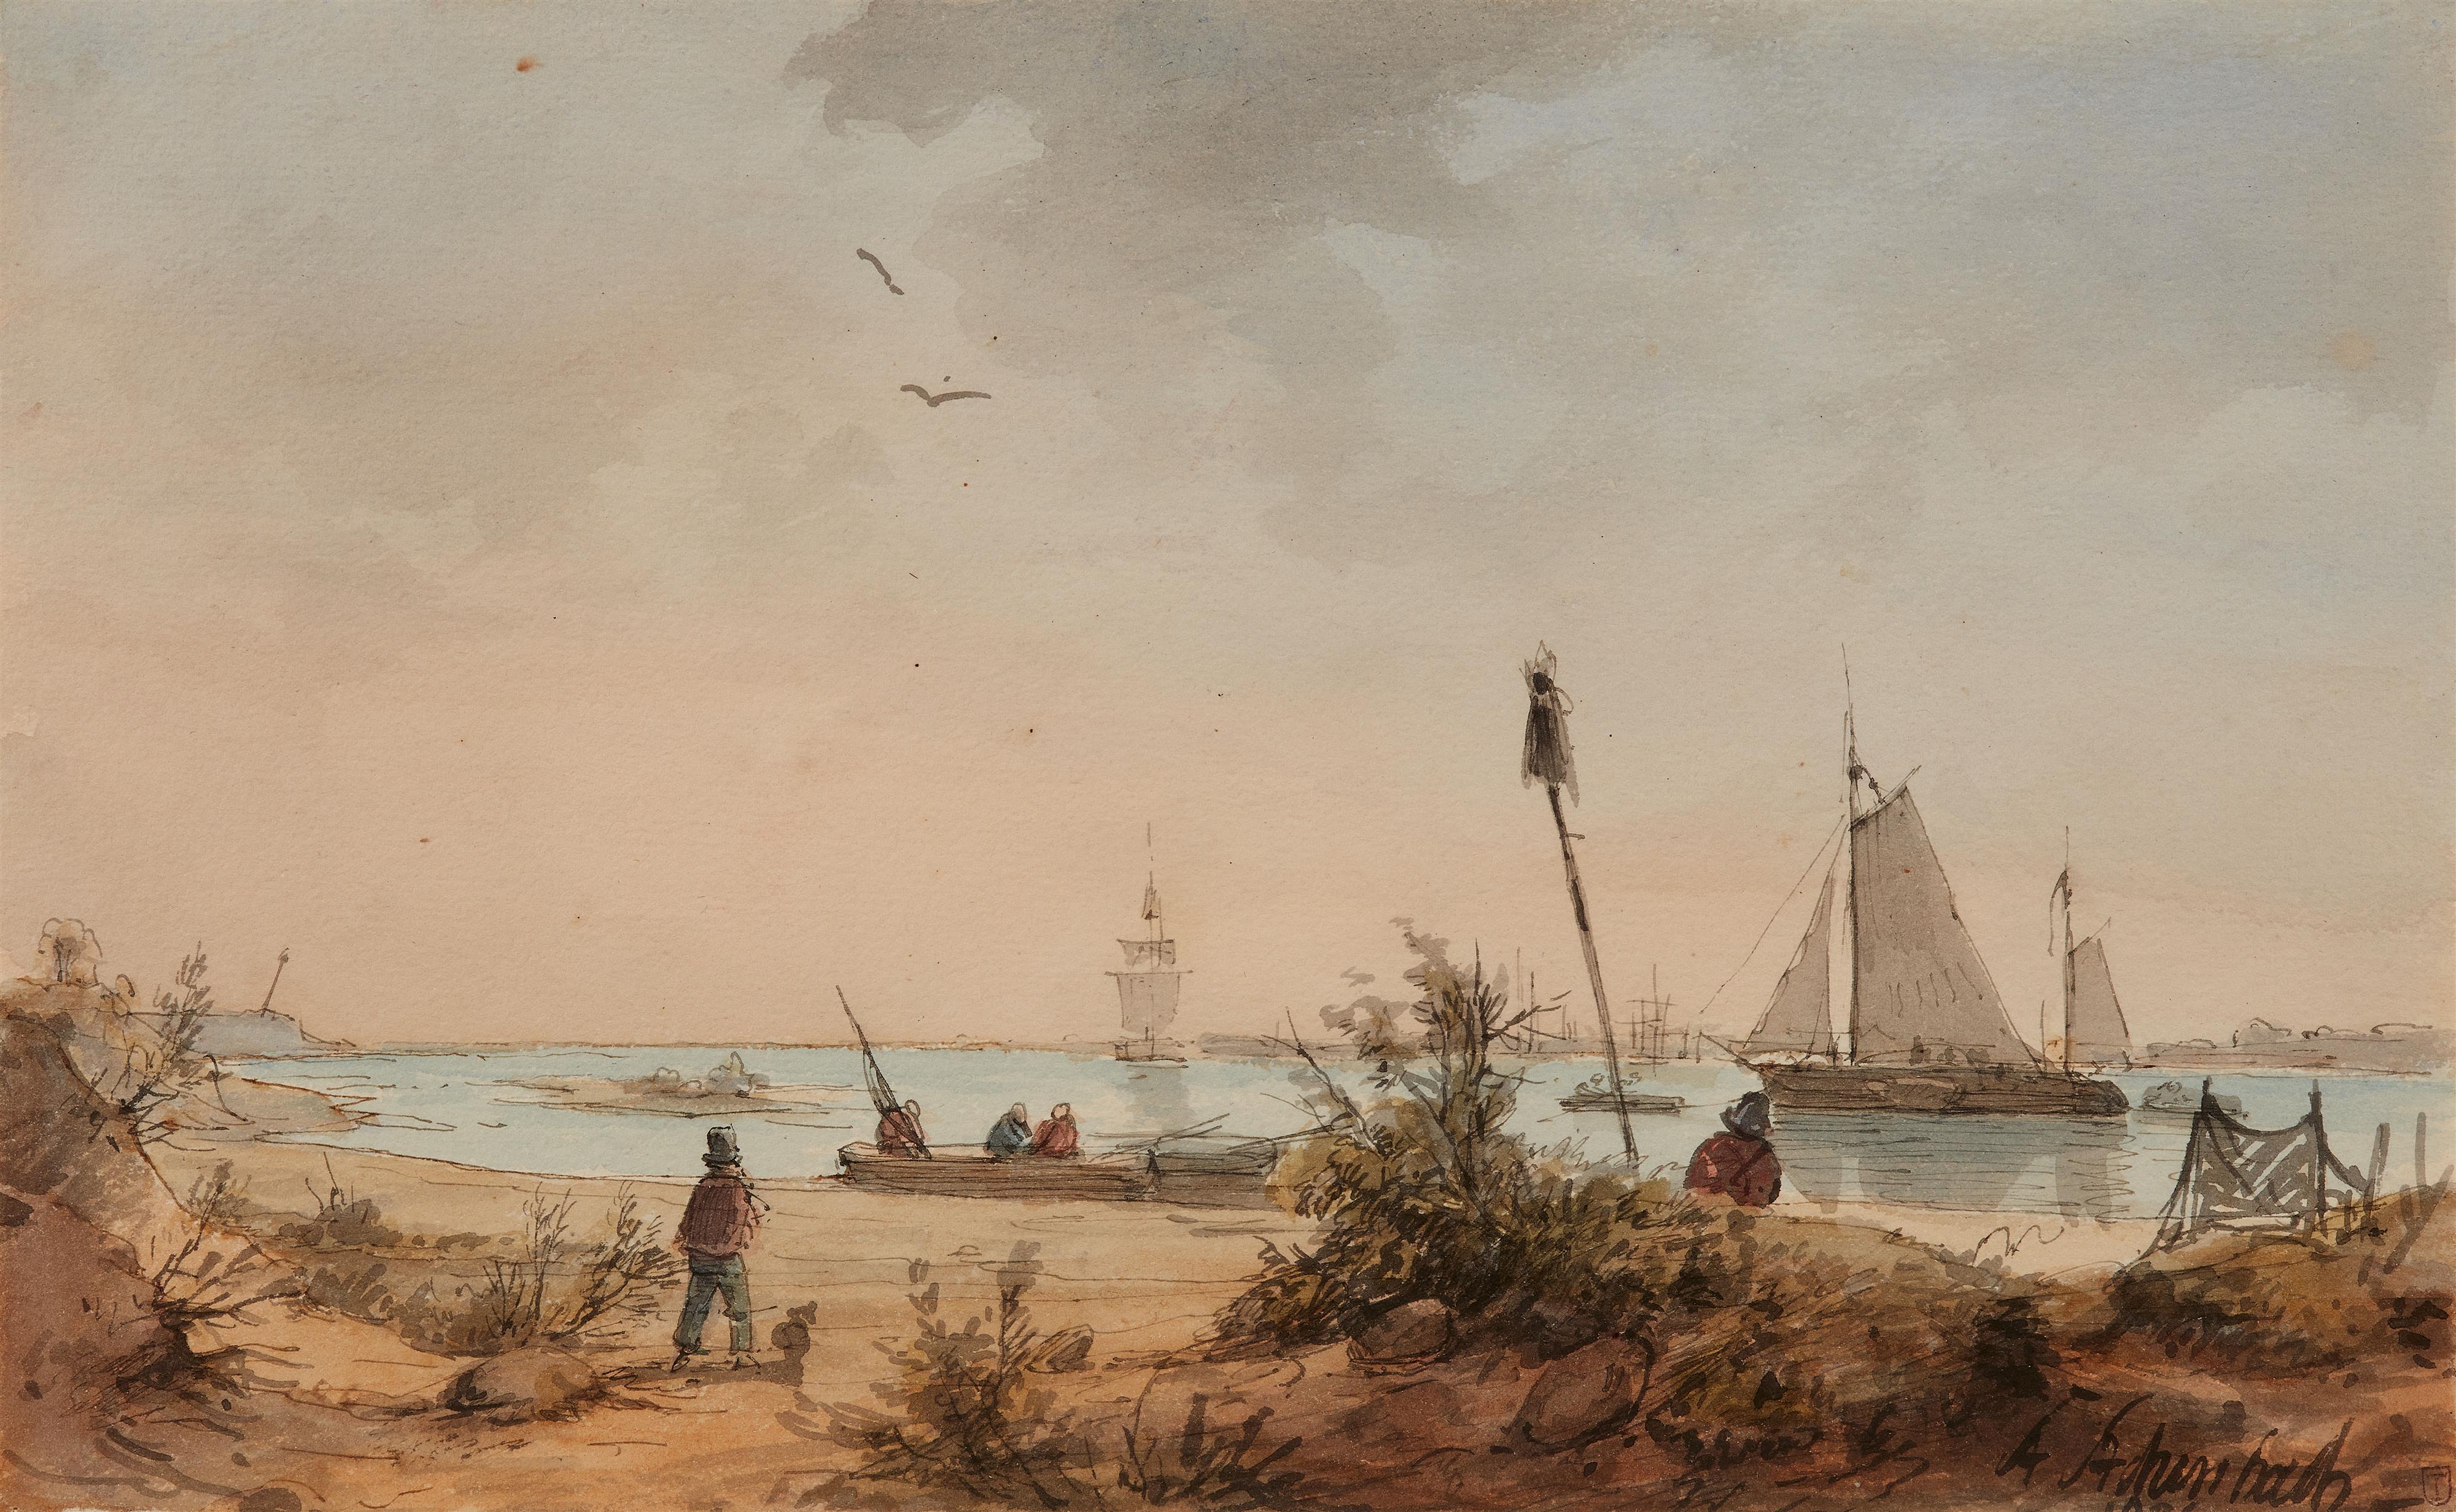 Andreas Achenbach - Coastal Landscape with Fishermen and Sailing Ships in the Distance - image-1